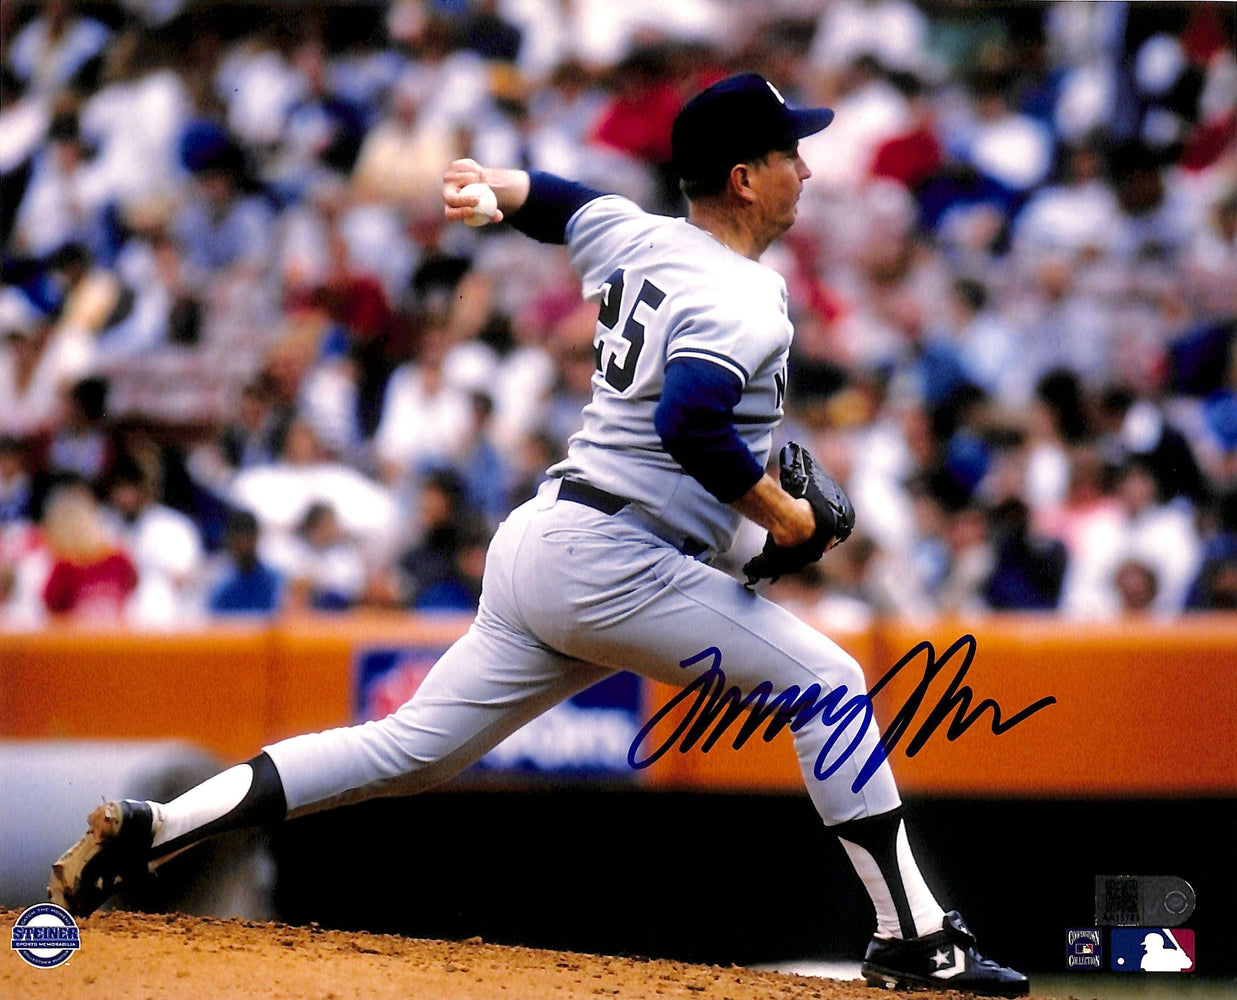 tommy john signed 8x10 photo aiv certificate of authenticity